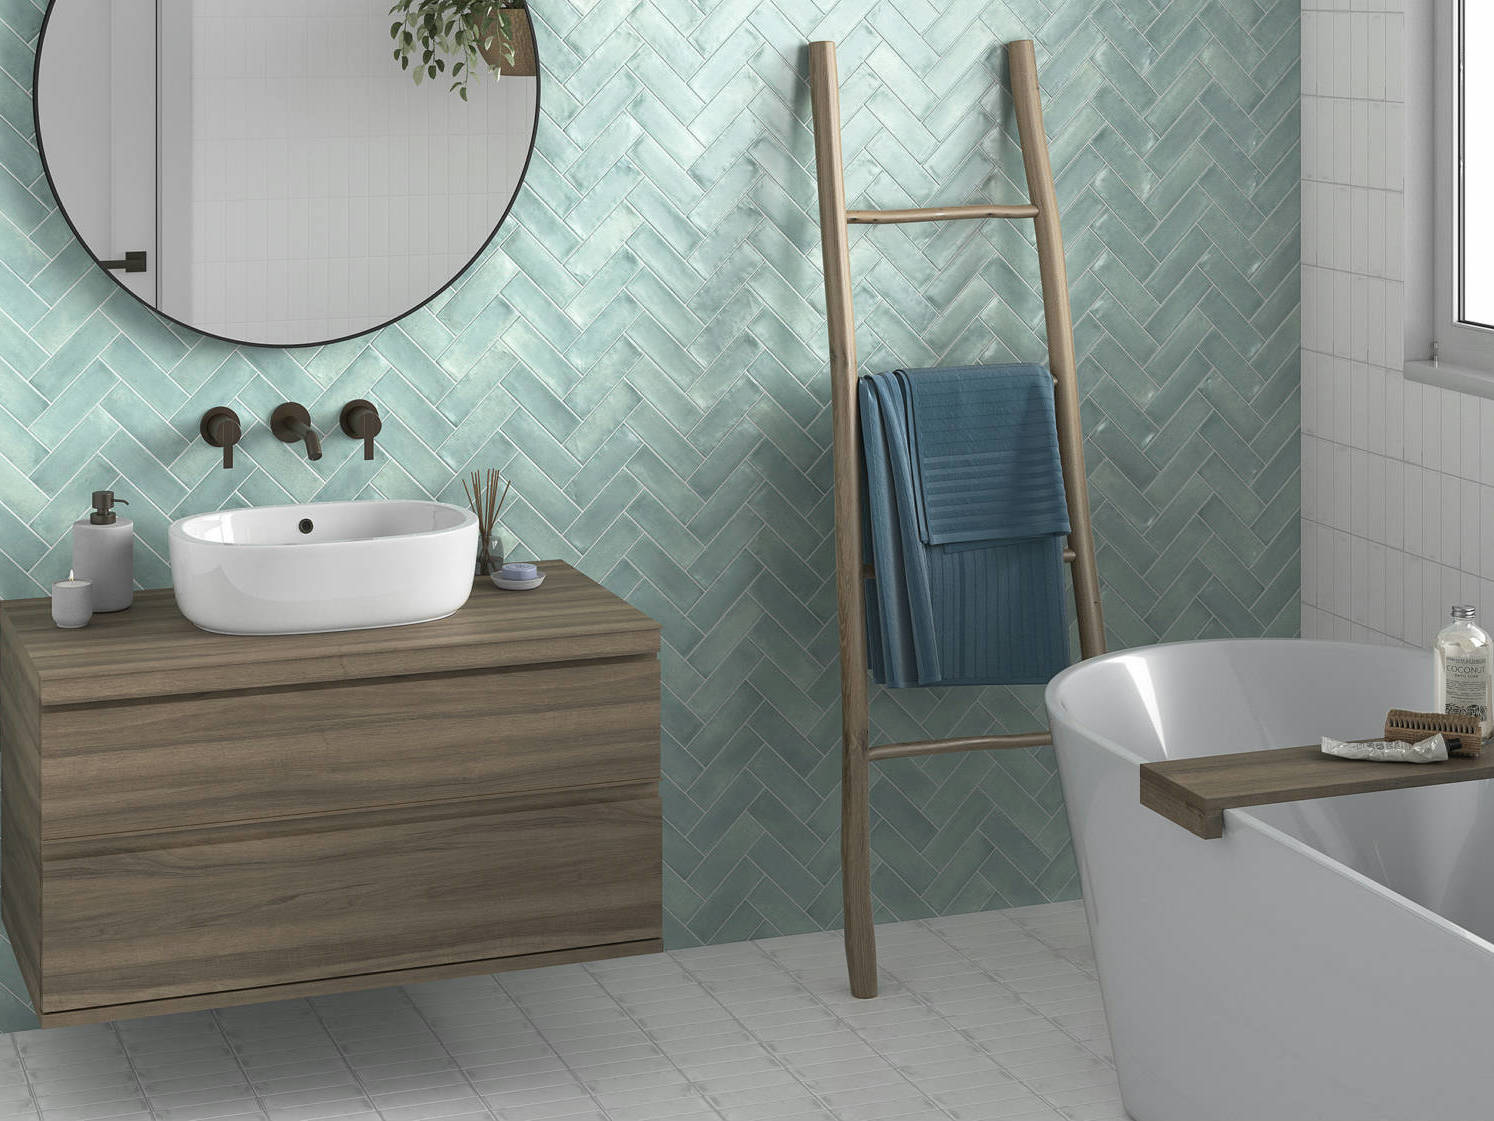 Lisbon 2X6 White and Sky | Qualis Ceramica | Luxury Tile and Vinyl at affordable prices